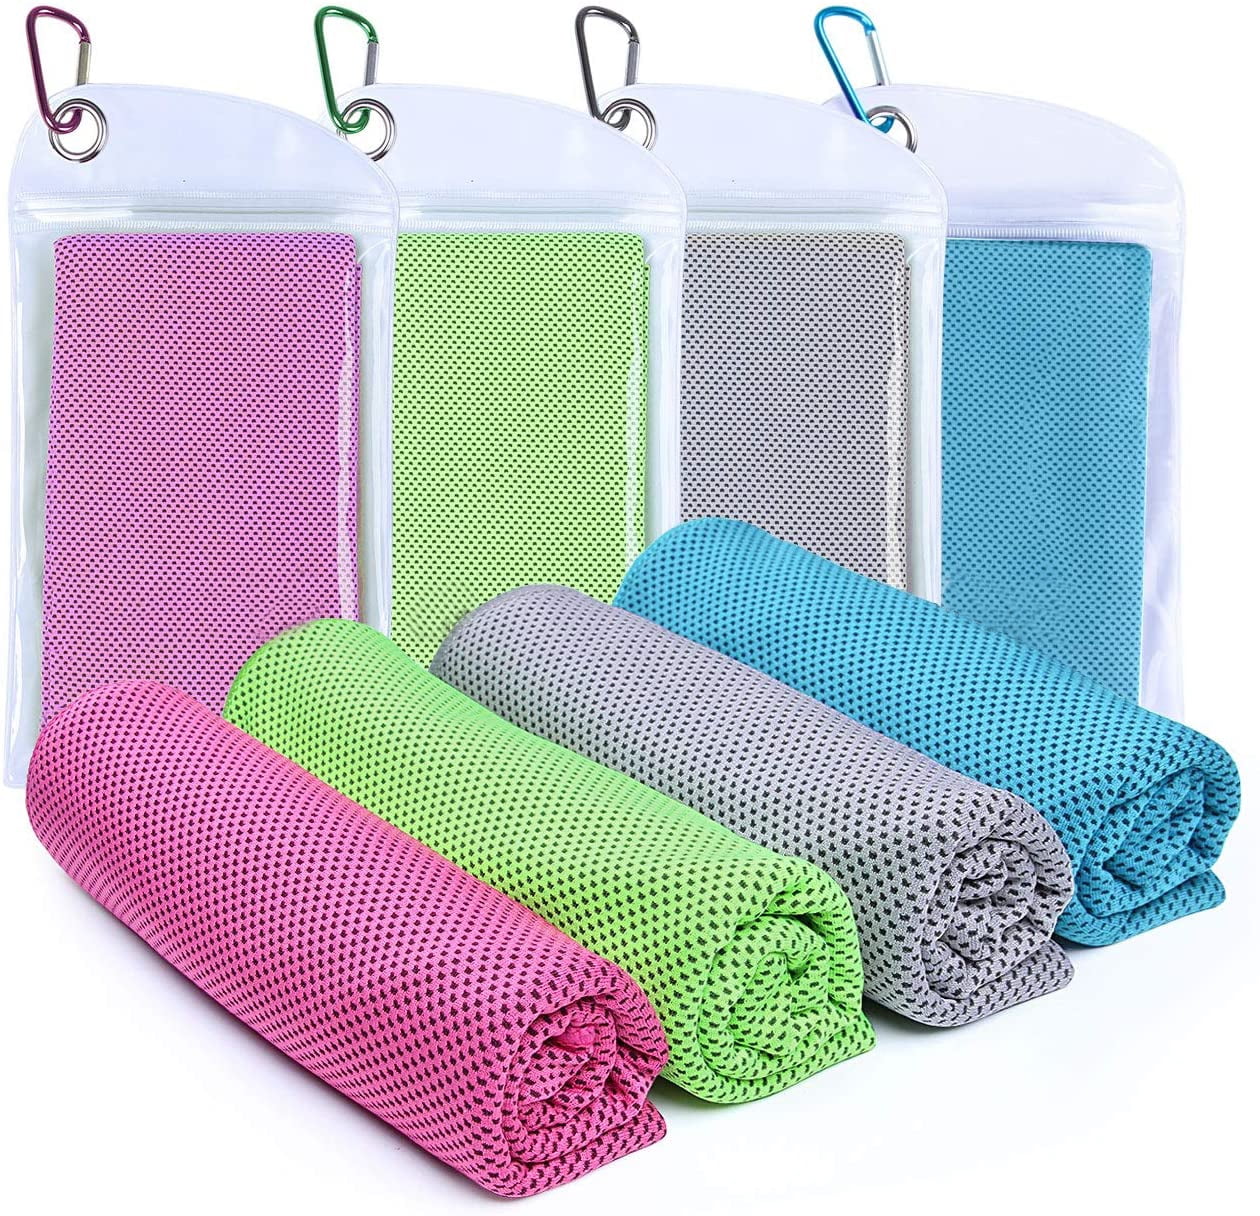 Workout & More Activities 40x 12 4 Packs Soft Breathable Chilly Towel for Yoga Fitness U-Pick Sport Running Cooling Towel Microfiber Towel Gym Workout,Camping Ice Towel